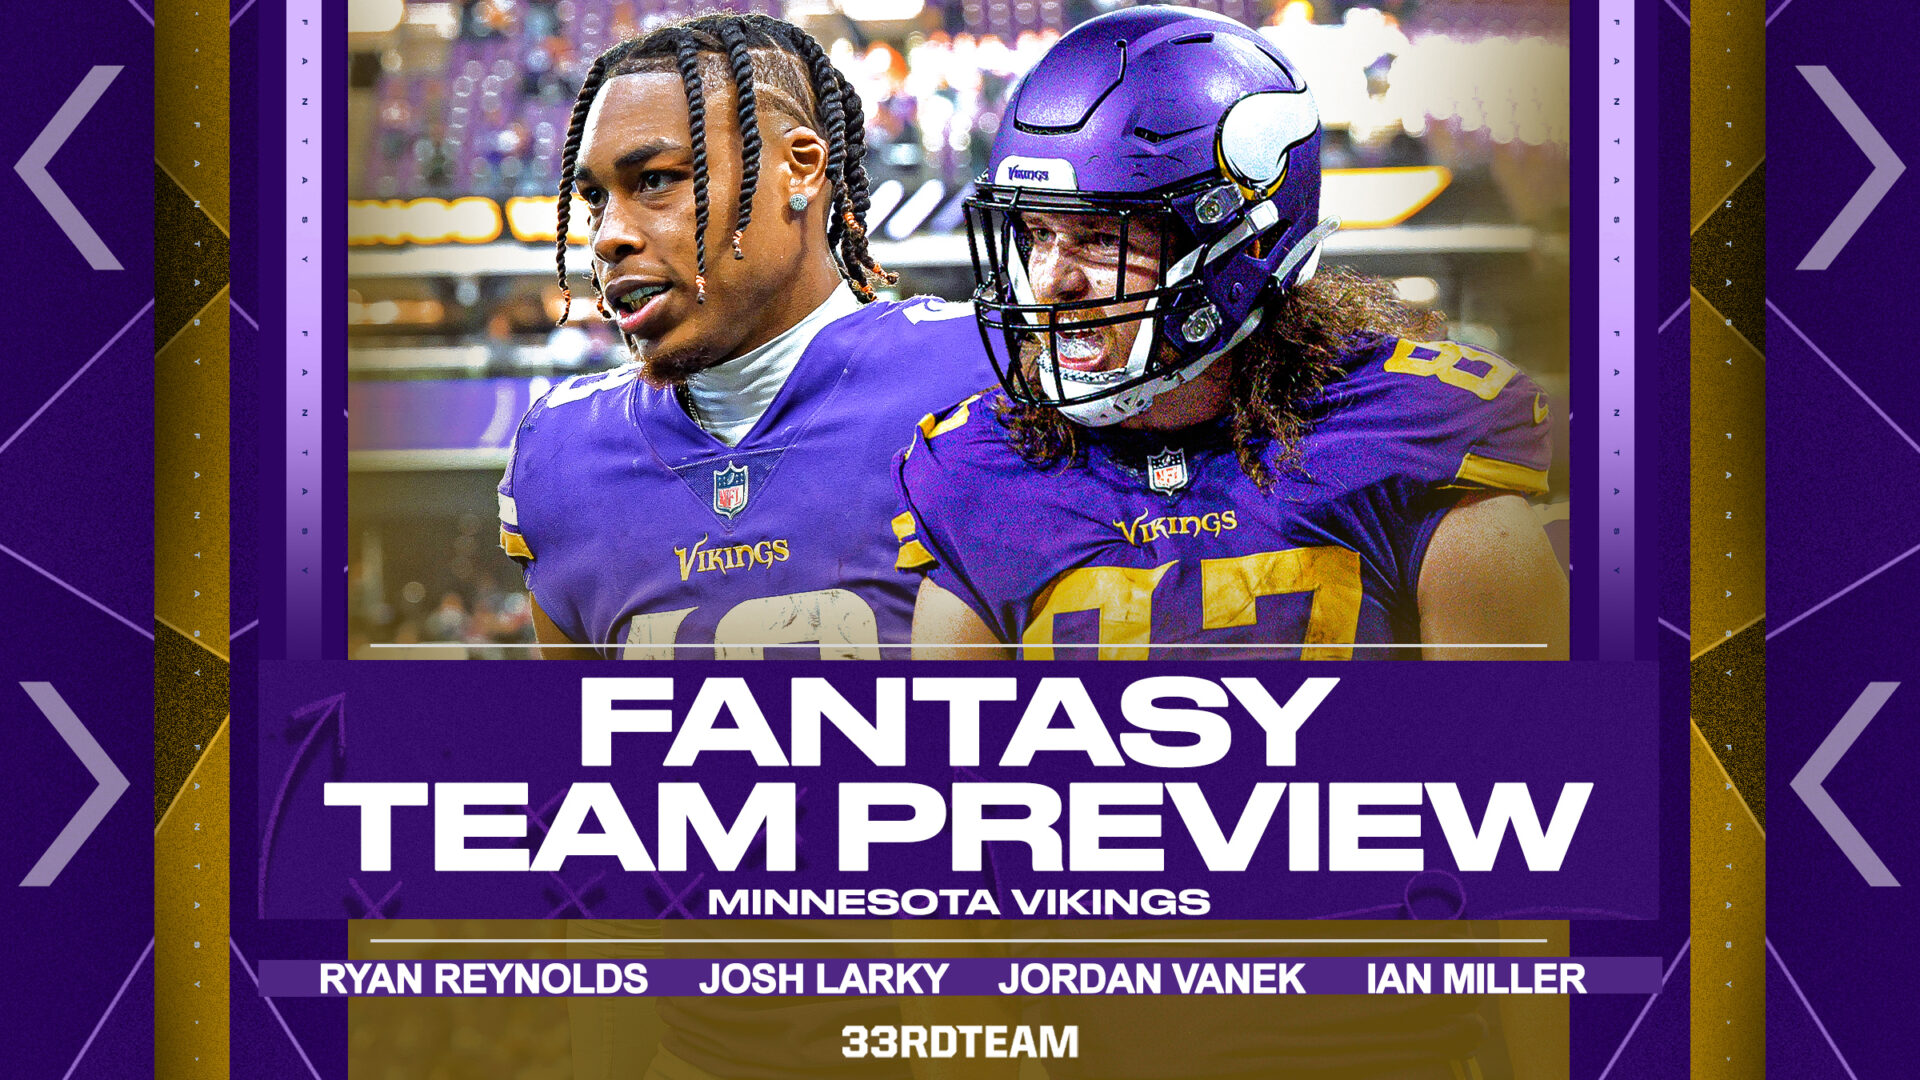 graphic featuring Justin Jefferson and T.J. Hockenson with the text "Minnesota Vikings Fantasy Team preview"